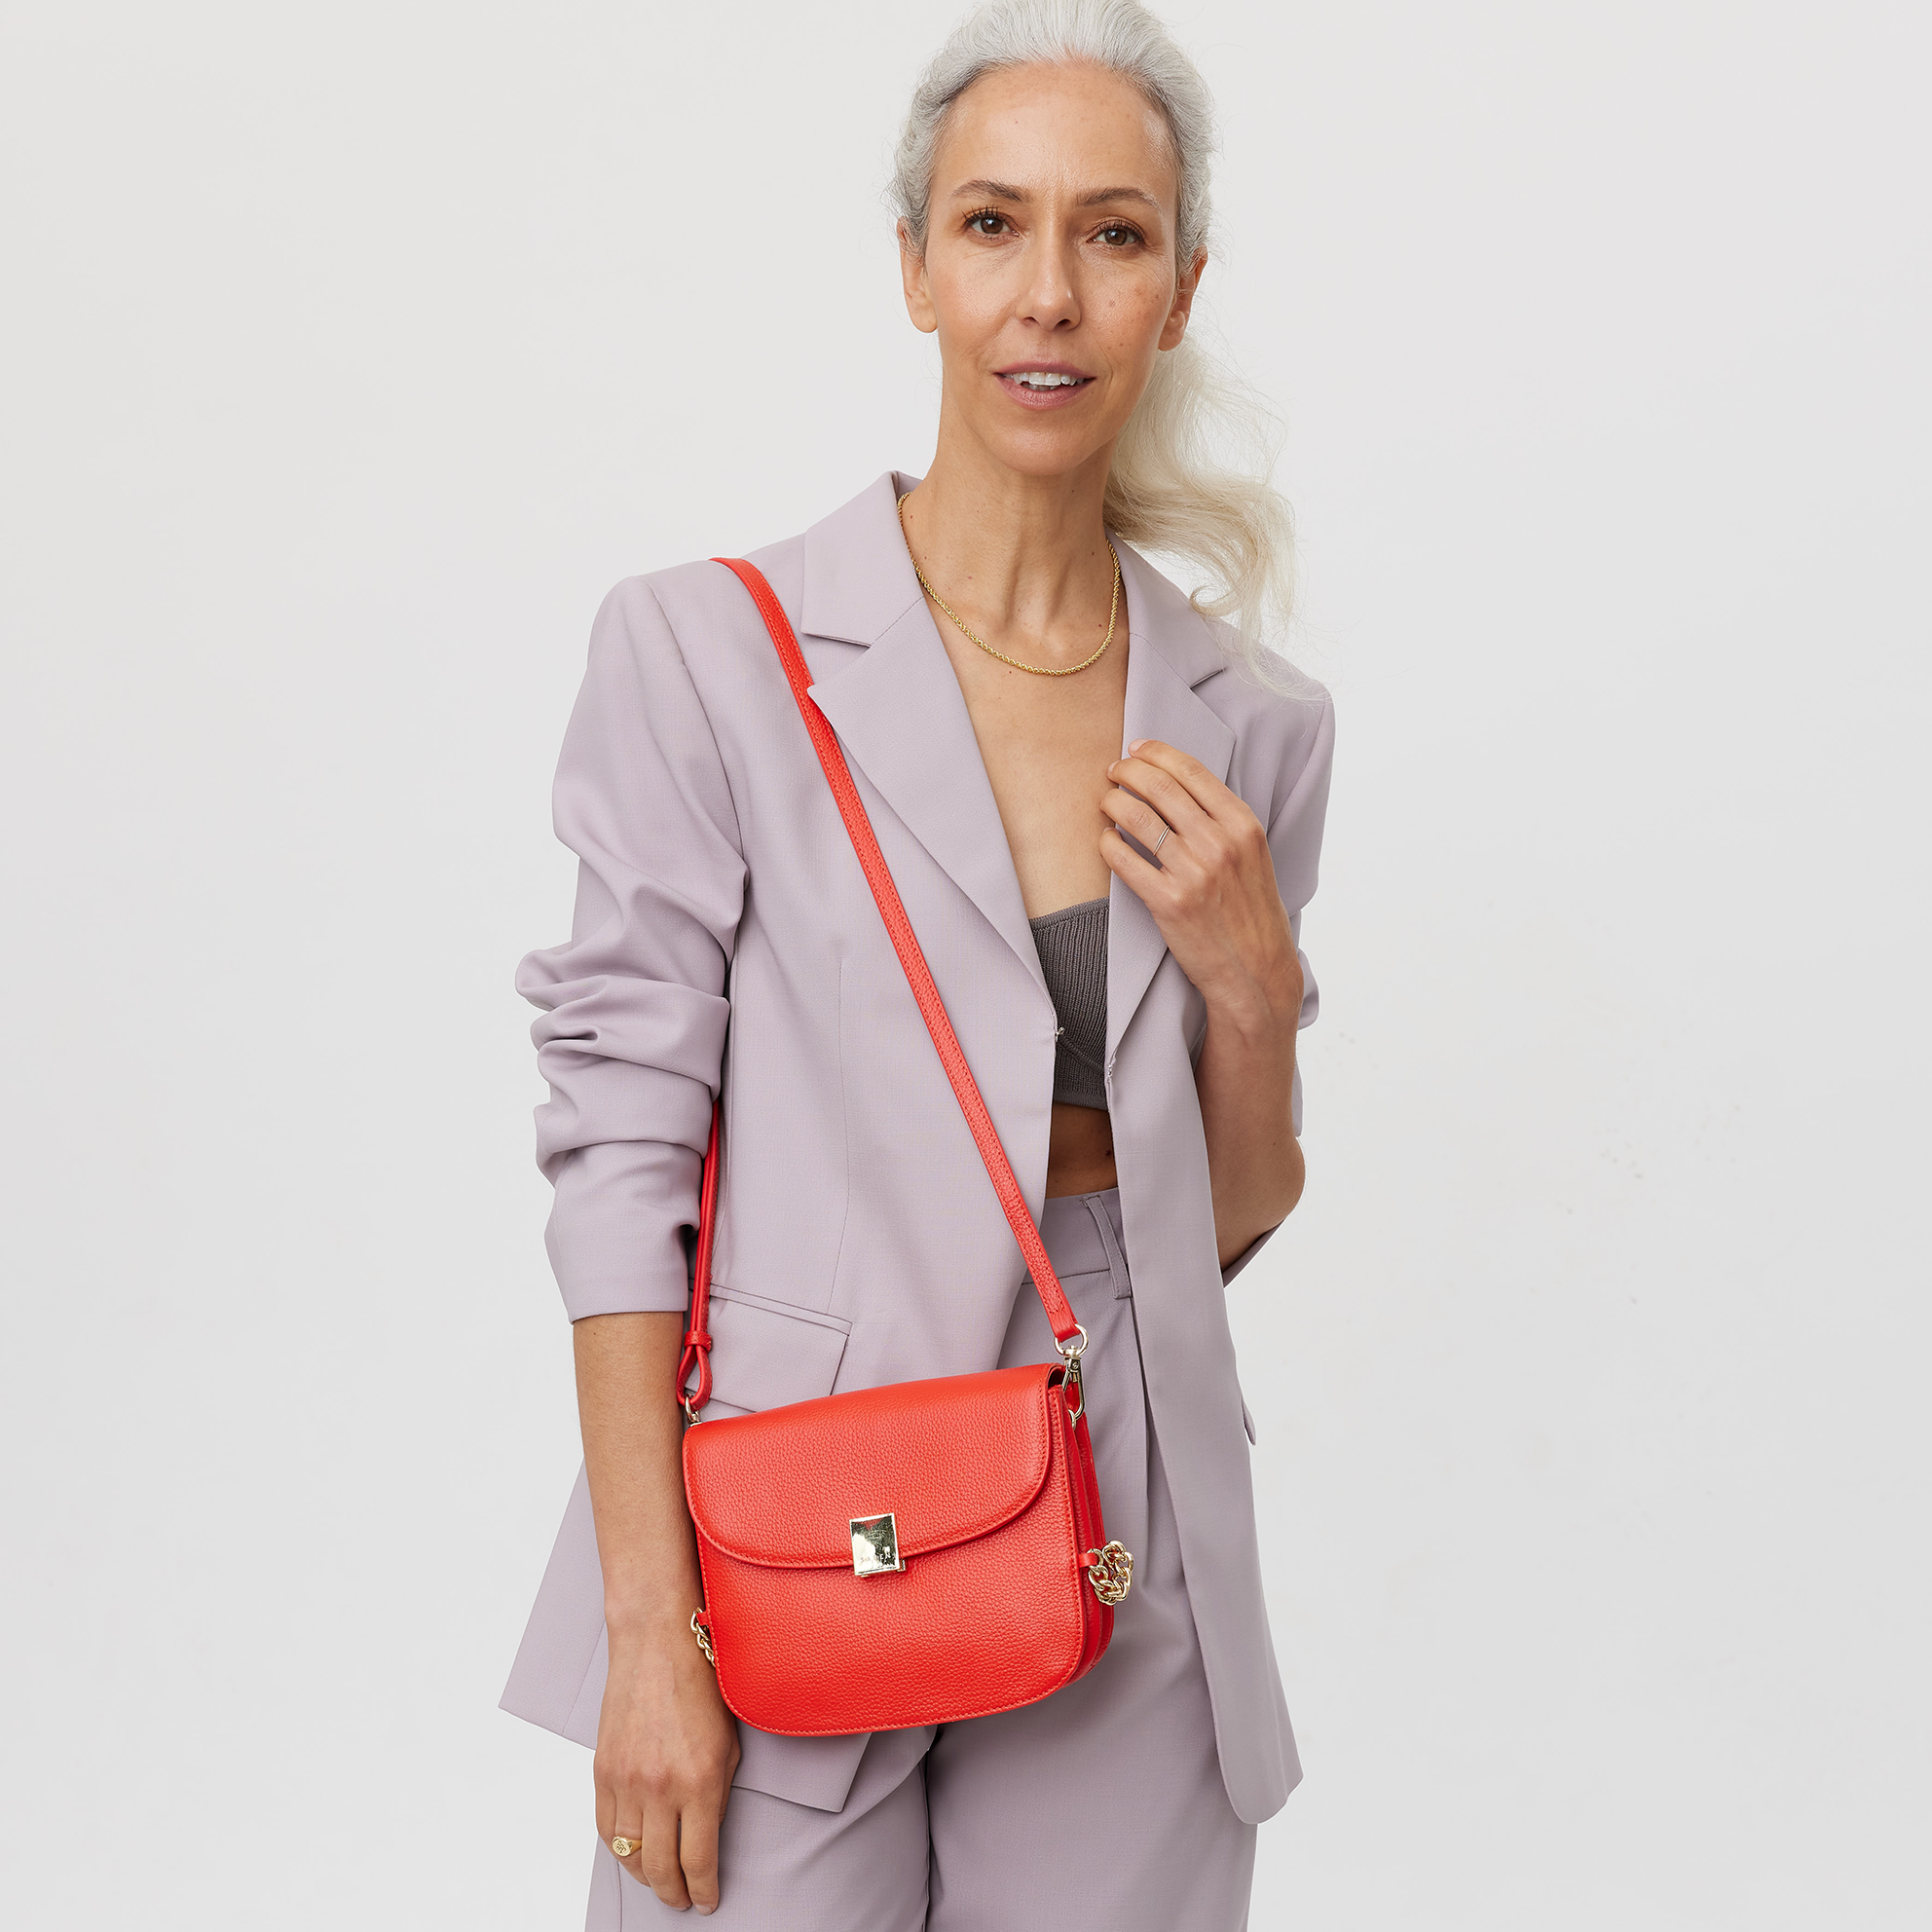 saben handbag blaise crossbody handbag designed in New Zealand and made out of 100% leather 